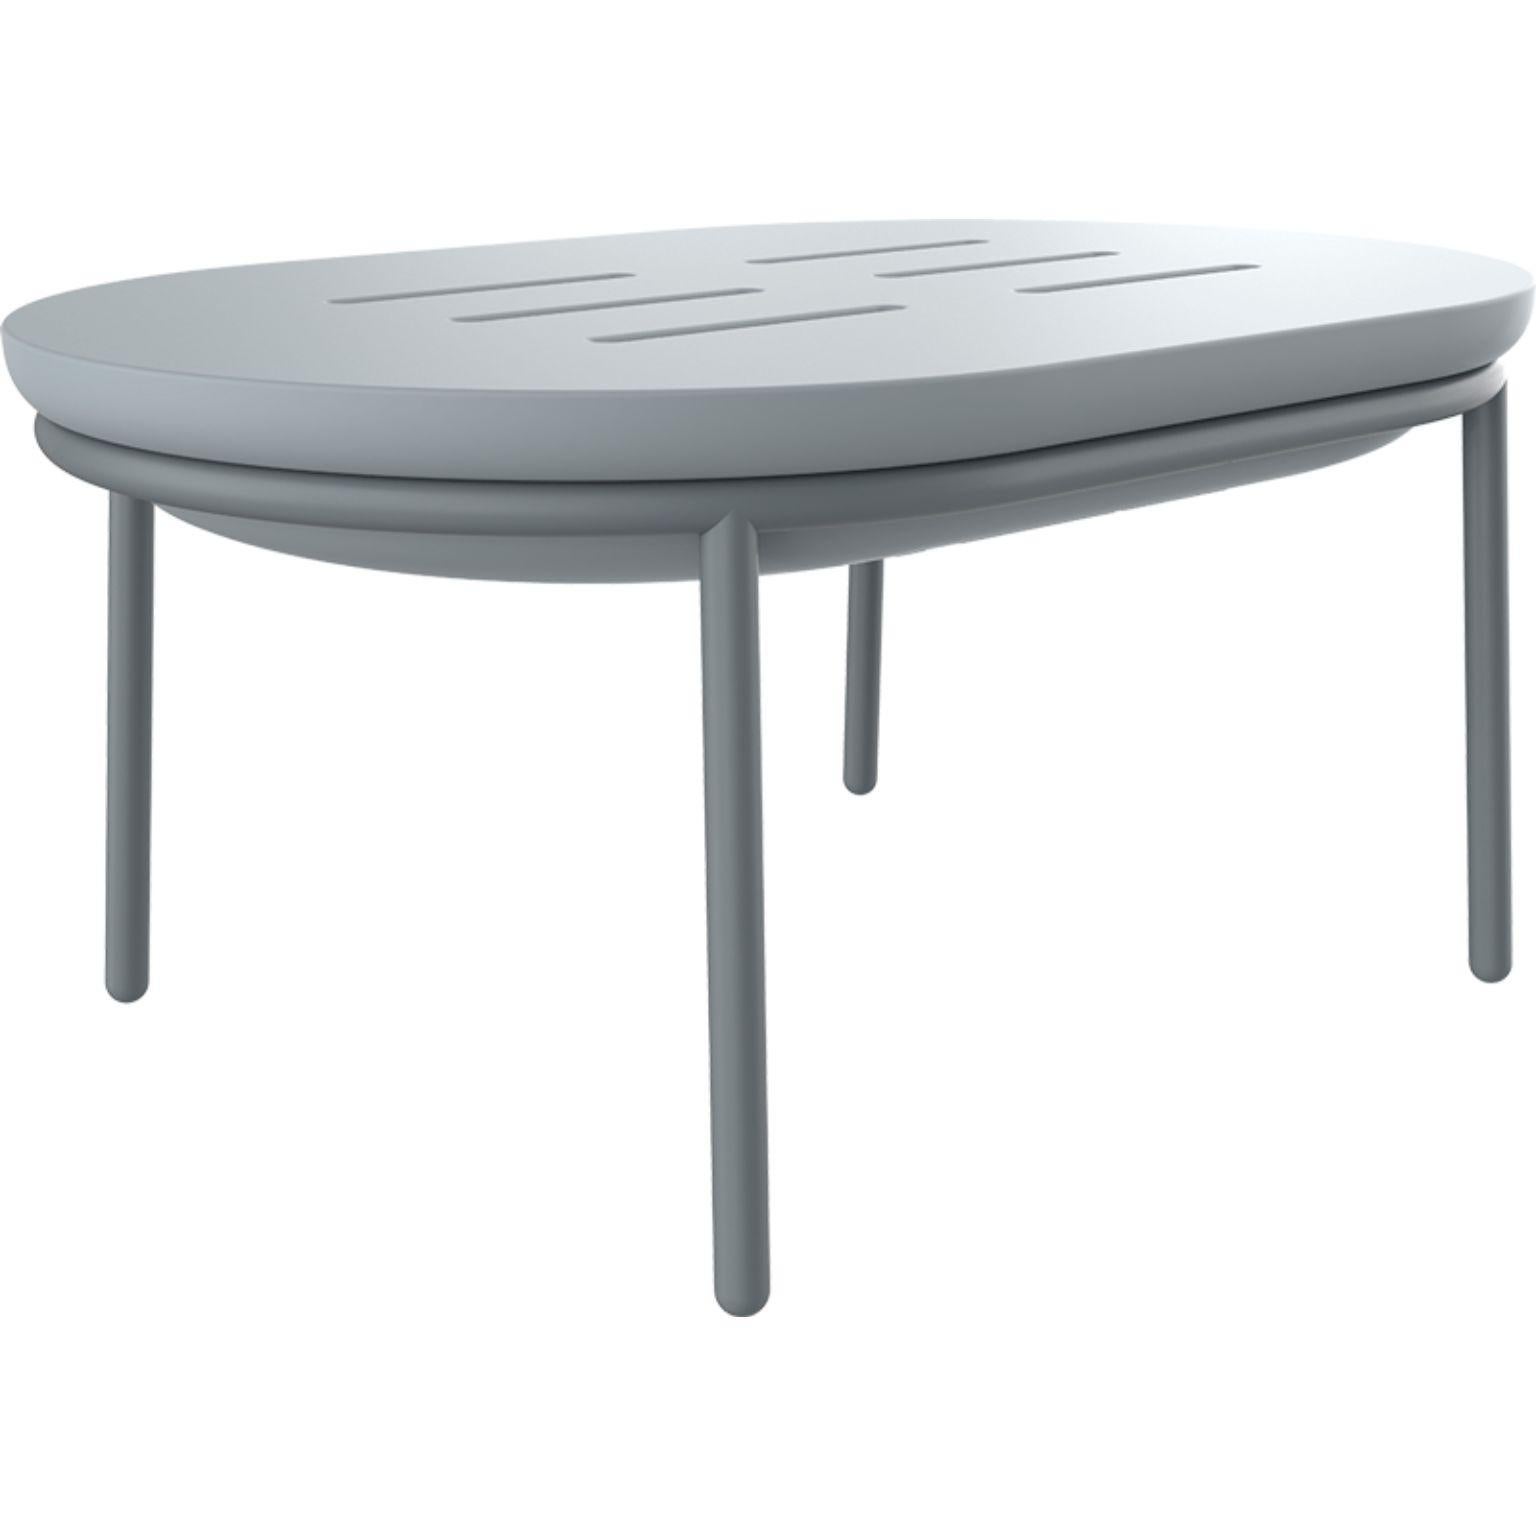 Lace Grey 90 low table by MOWEE
Dimensions: D60 x W90 x H41 cm
Material: Polyethylene and stainless steel.
Weight: 9.2 kg
Also Available in different colors and finishes (lacquered).

Lace is a collection of furniture made by rotomoulding. Its